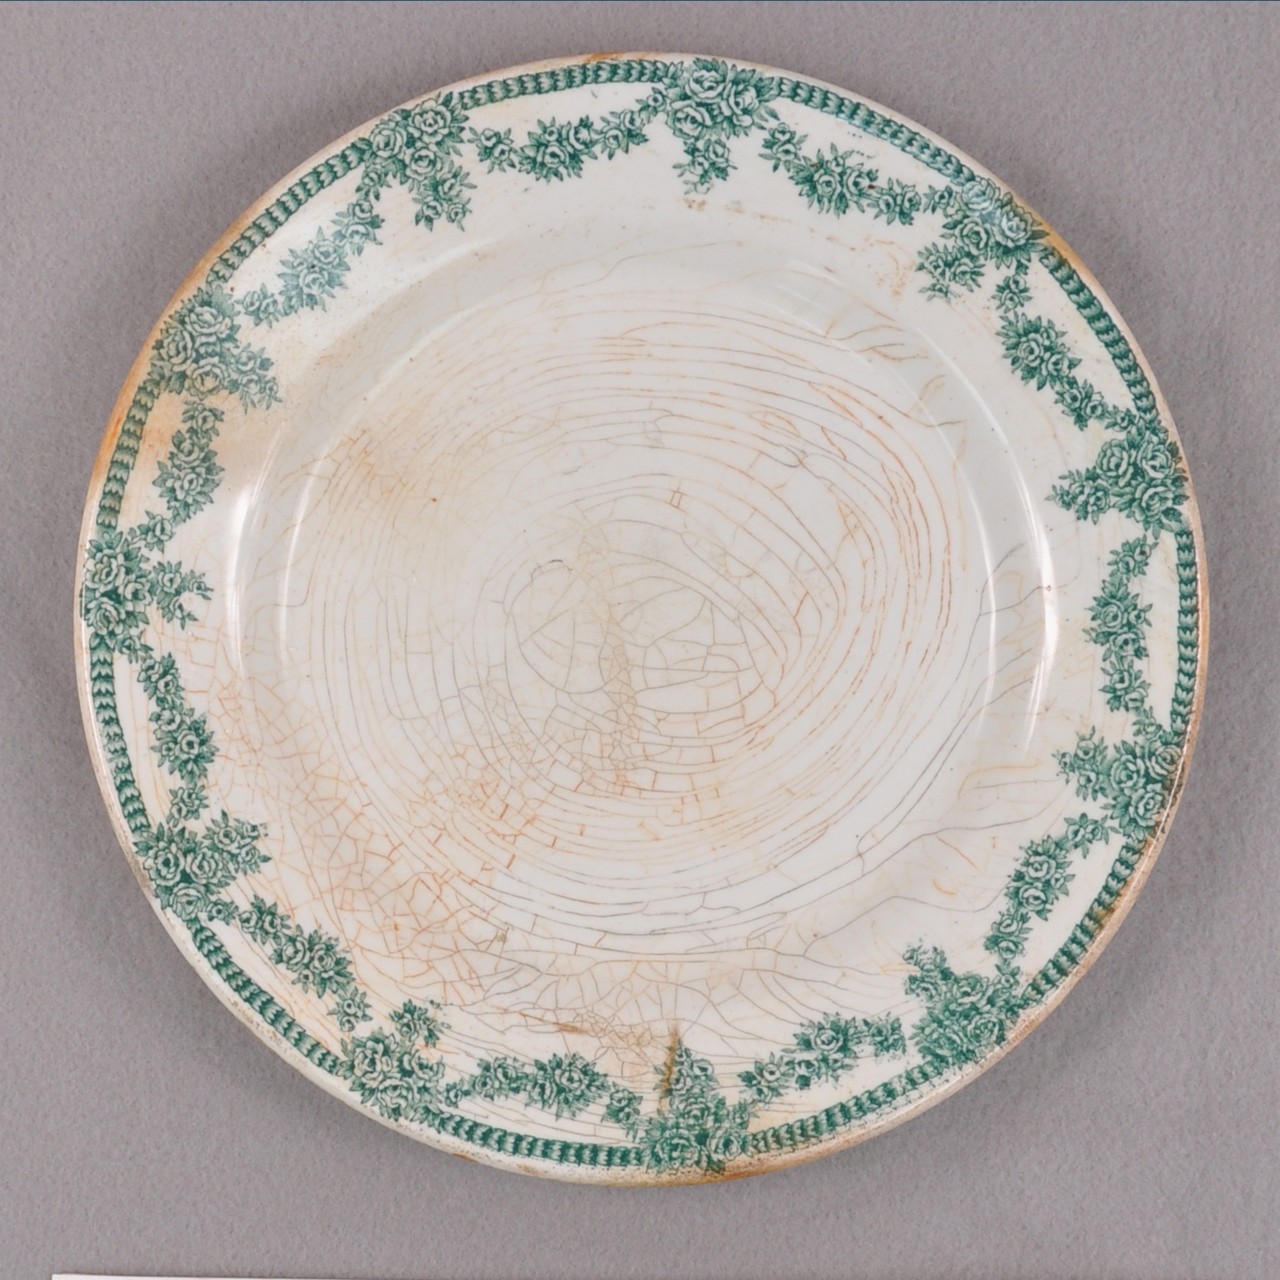 <p>A white stoneware plate recovered from USS San Diego with the glazed cracked. It has a continuous green flower and vine pattern around the border.</p>